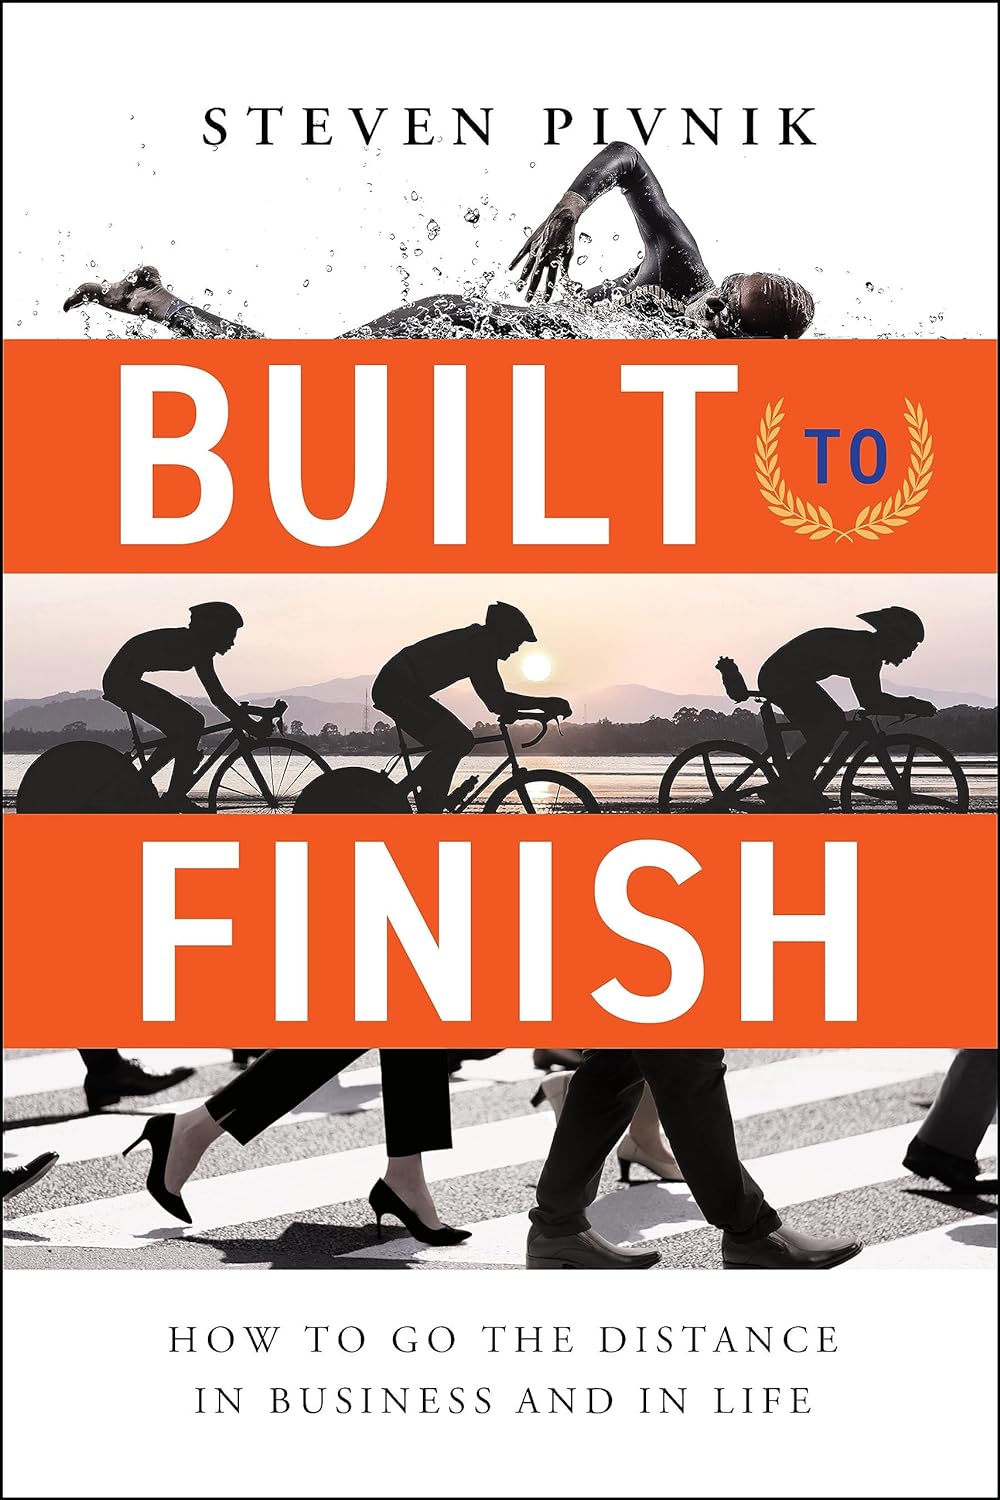 Built to Finish: How to Go the Distance in Business and in Life by Steven Pivnik